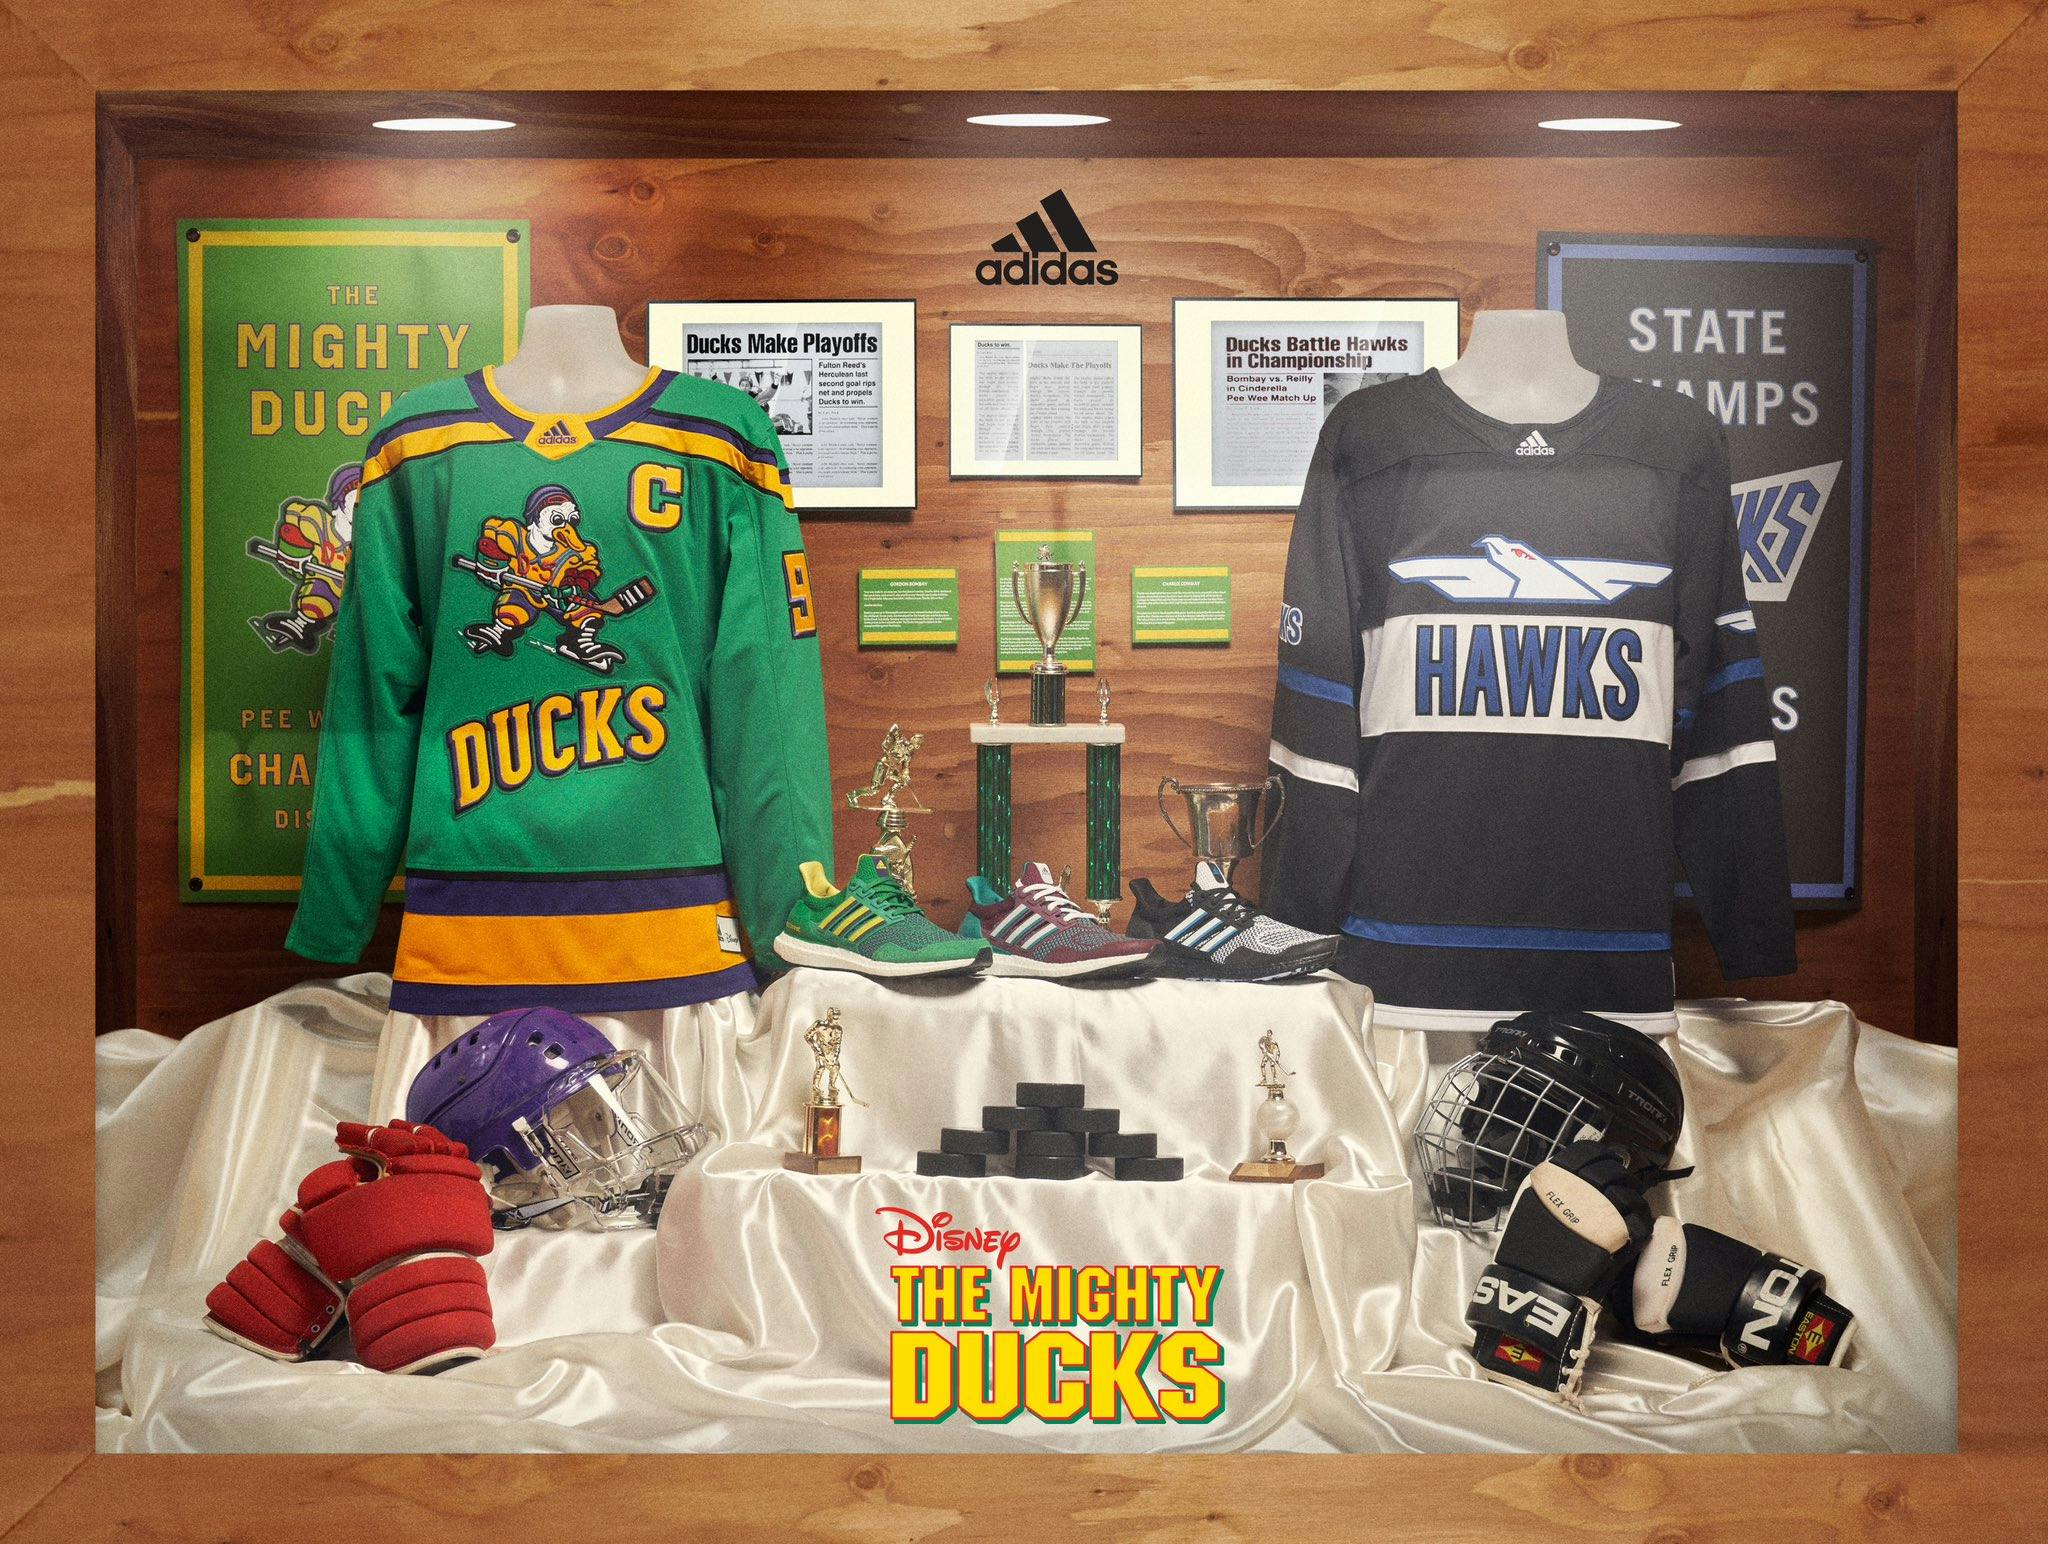 Adidas and Disney team up to release jerseys from the 1992 Mighty Ducks film